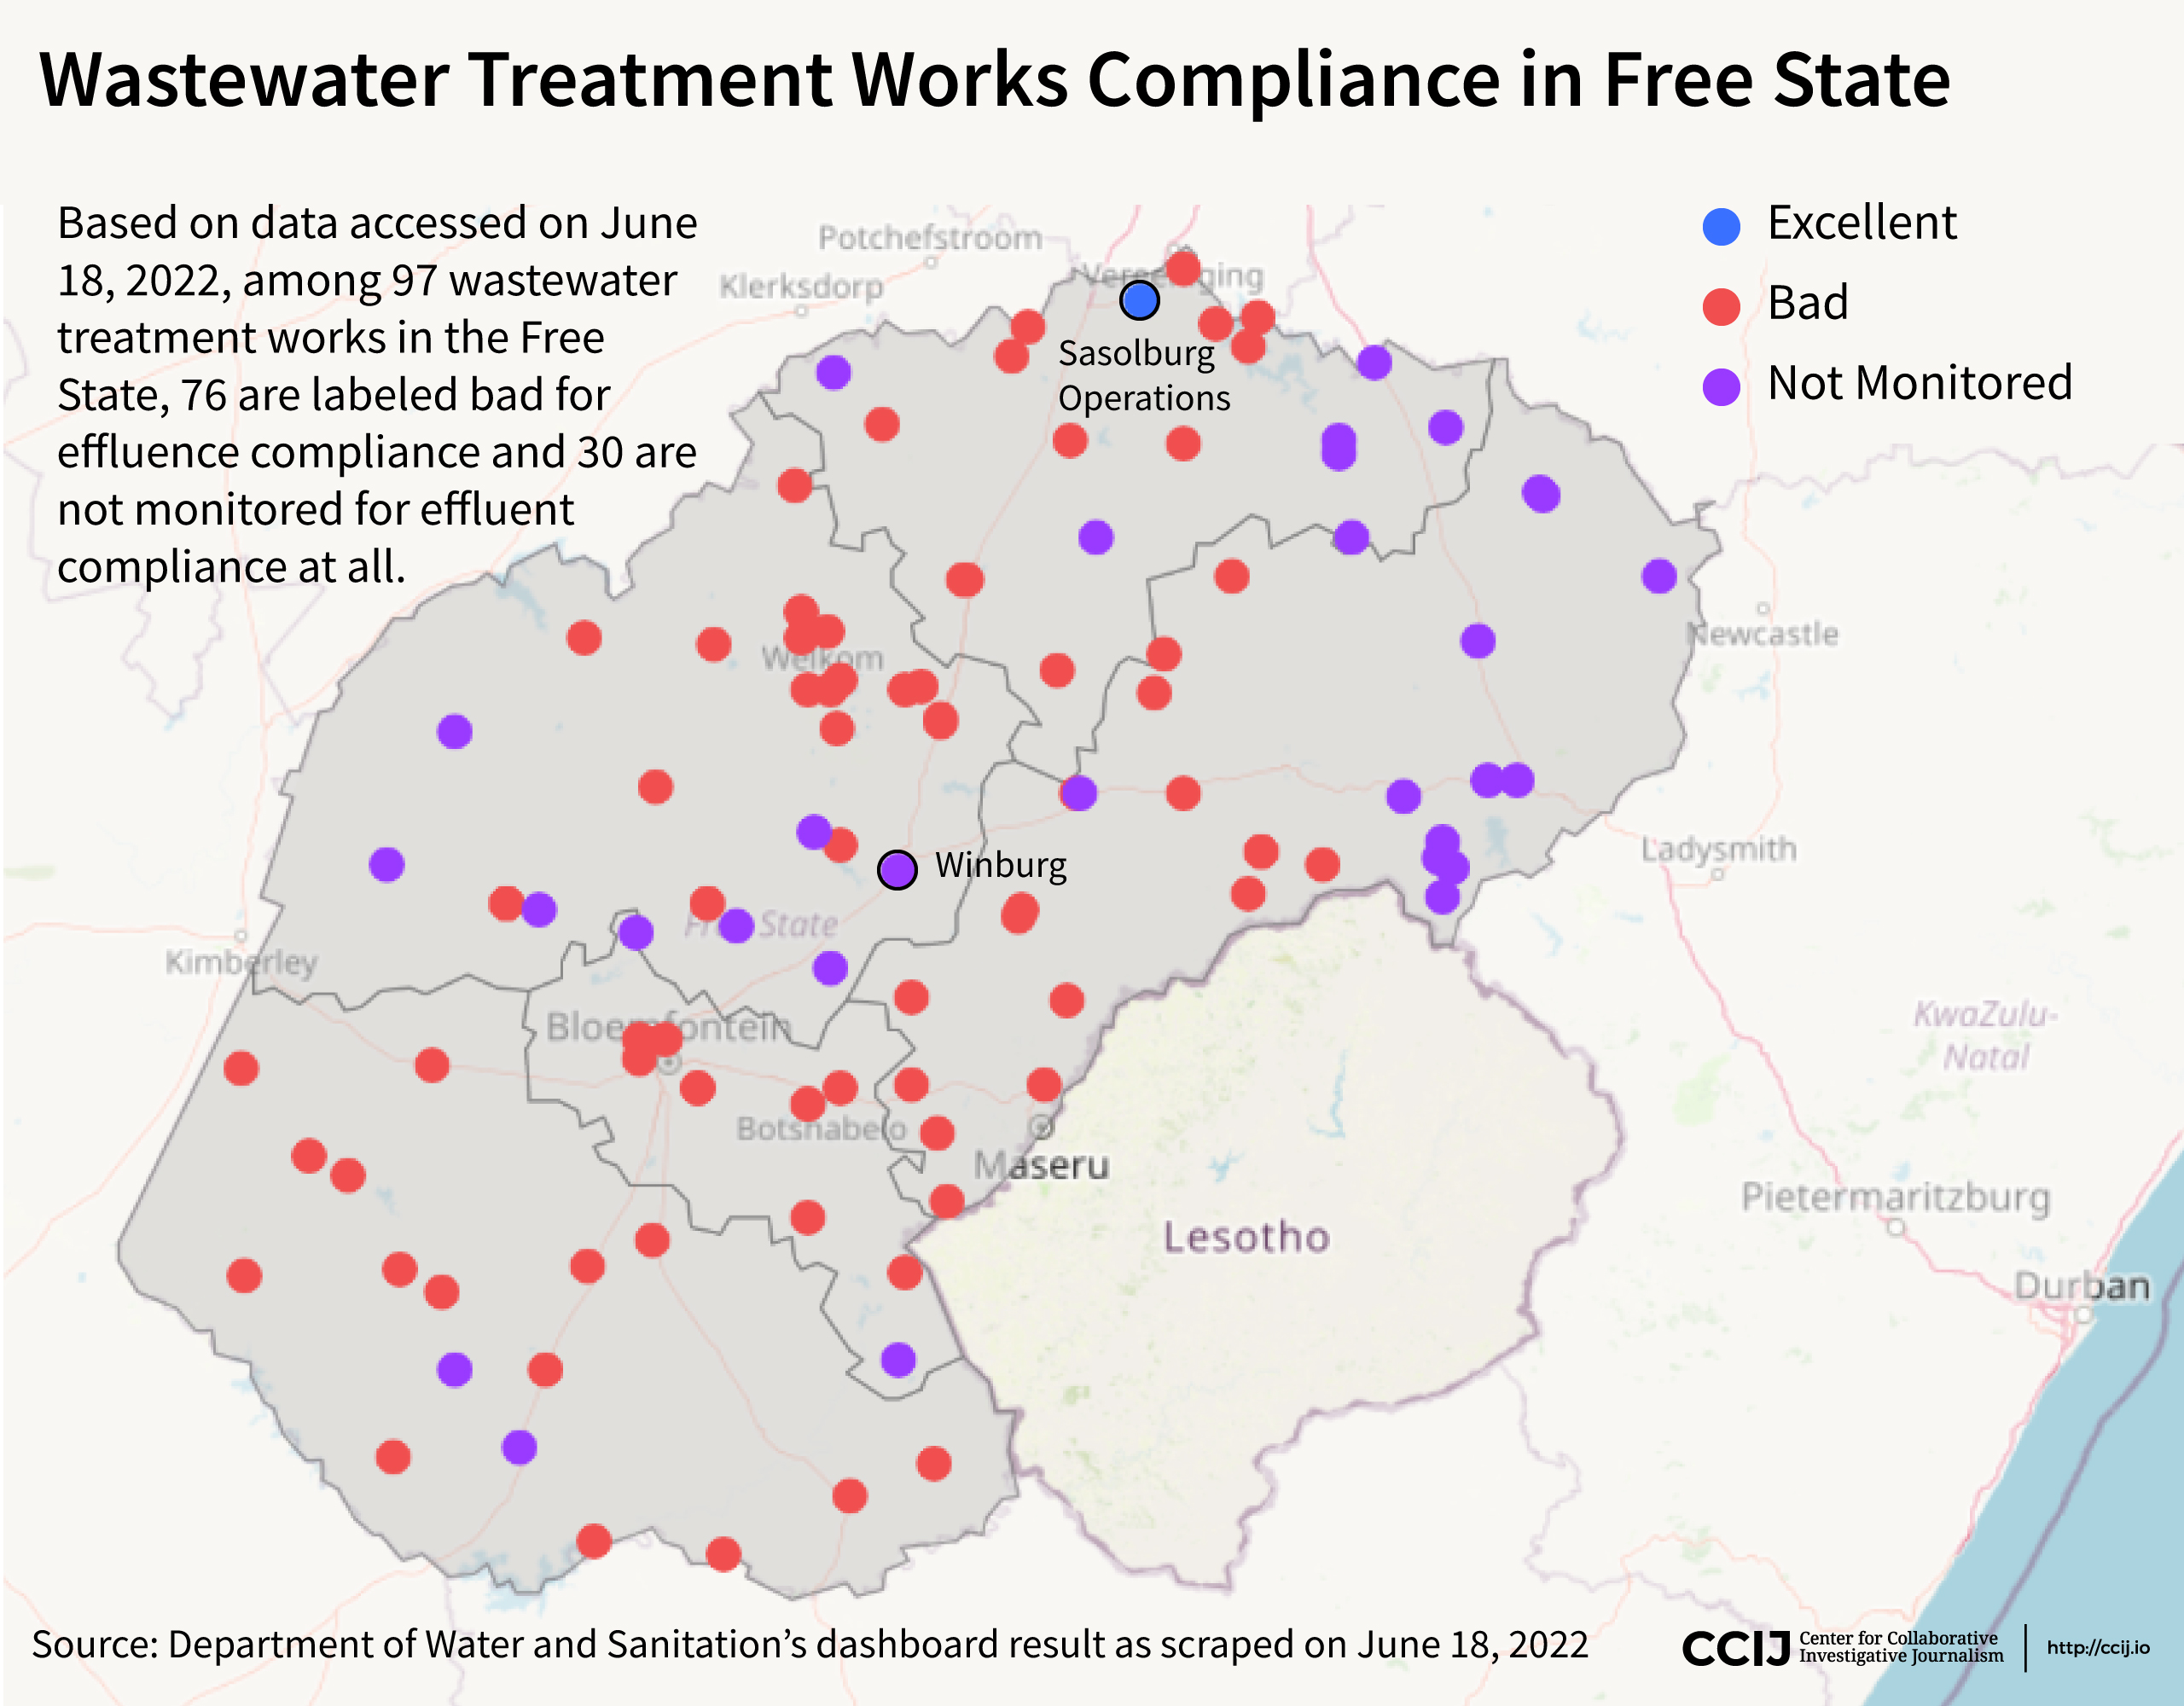 Wastewater treatment works compliance in Free State